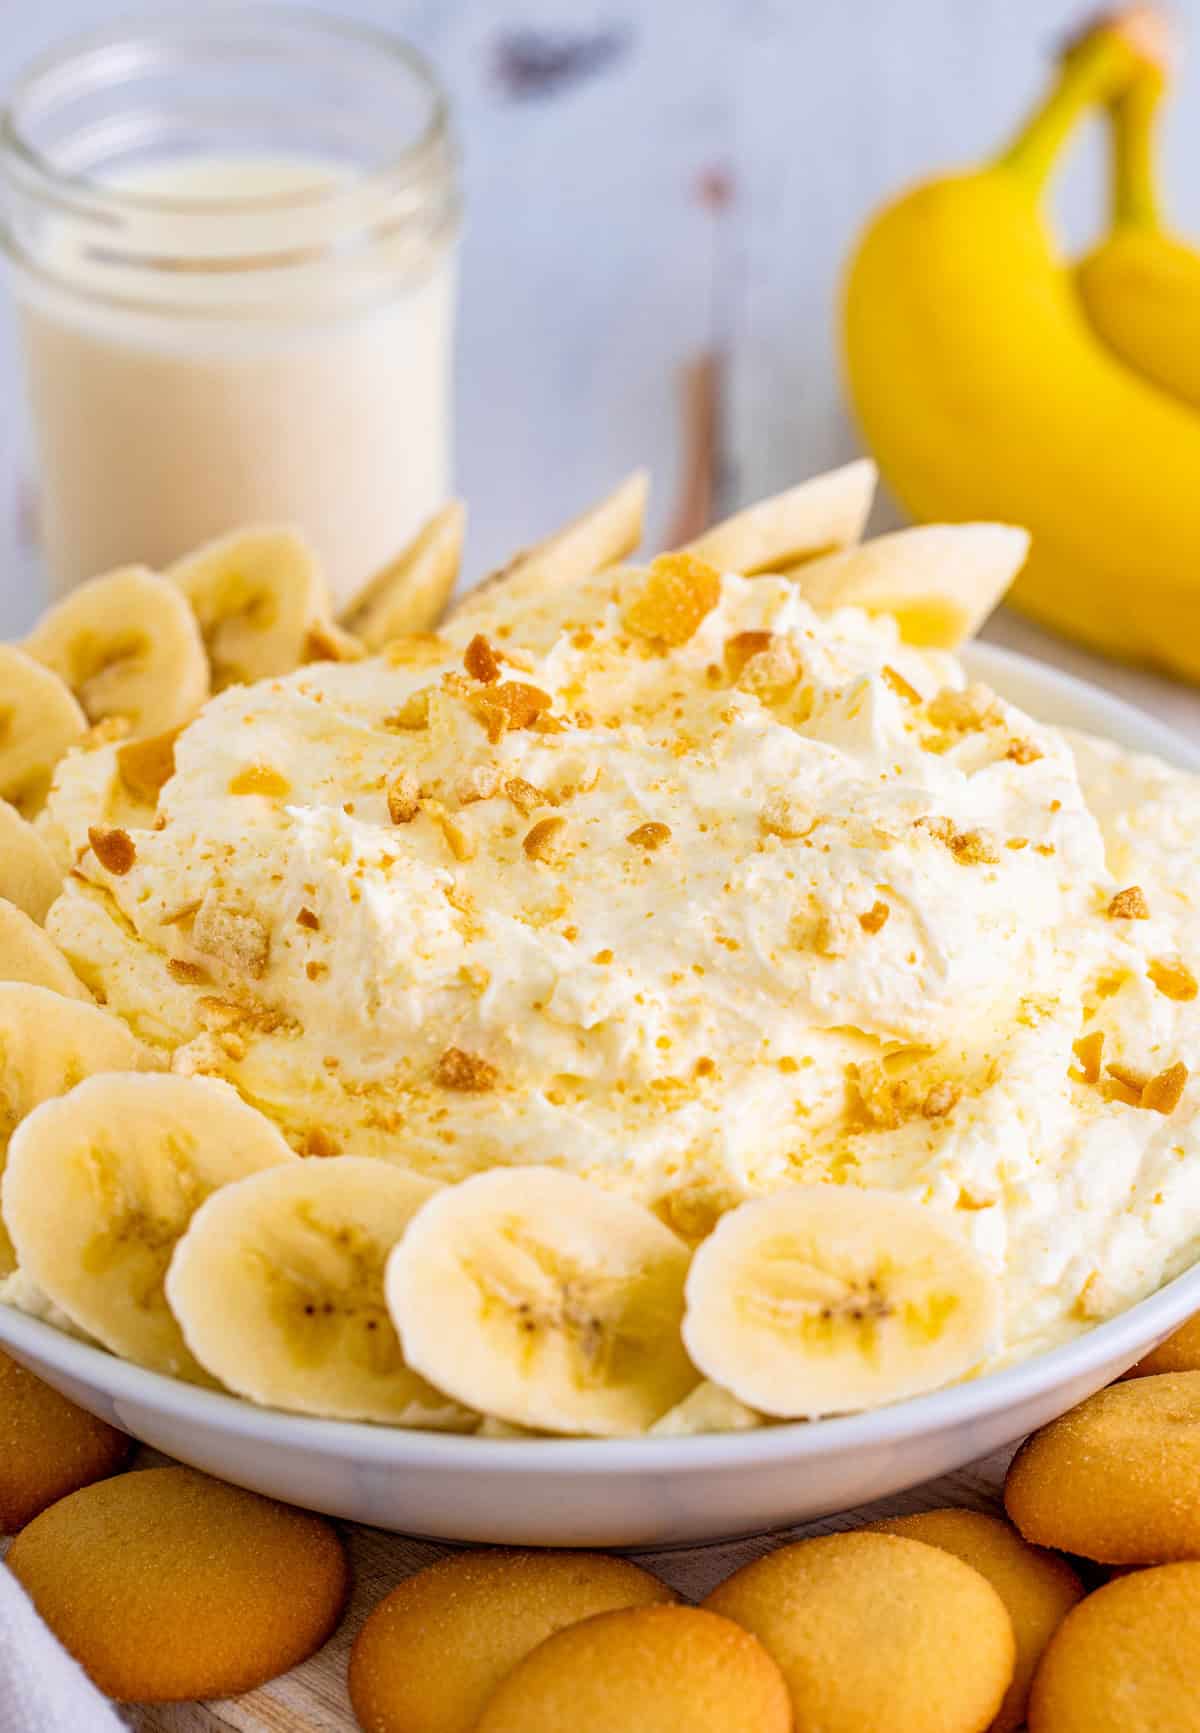 Banana Cream Pie Dip in white bowl with bananas and crushed vanilla wafers with milk and bananas behind it.